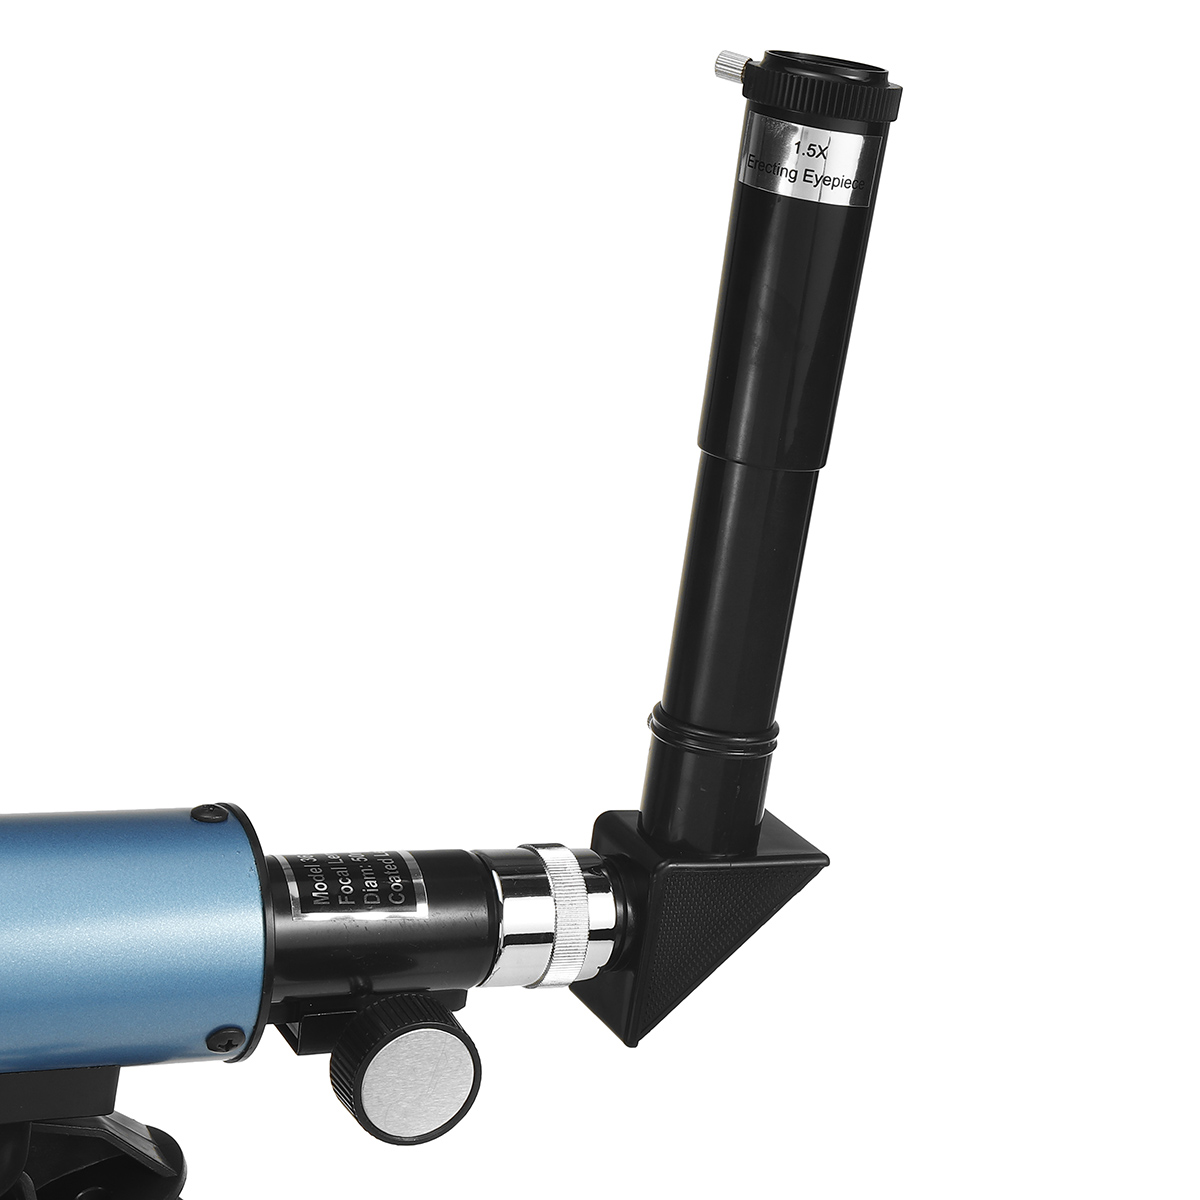 90x-Magnification-Astronomical-Telescope-Clear-Image-with-Remote-Control-and-Camera-Rod-for-Observe--1851121-12